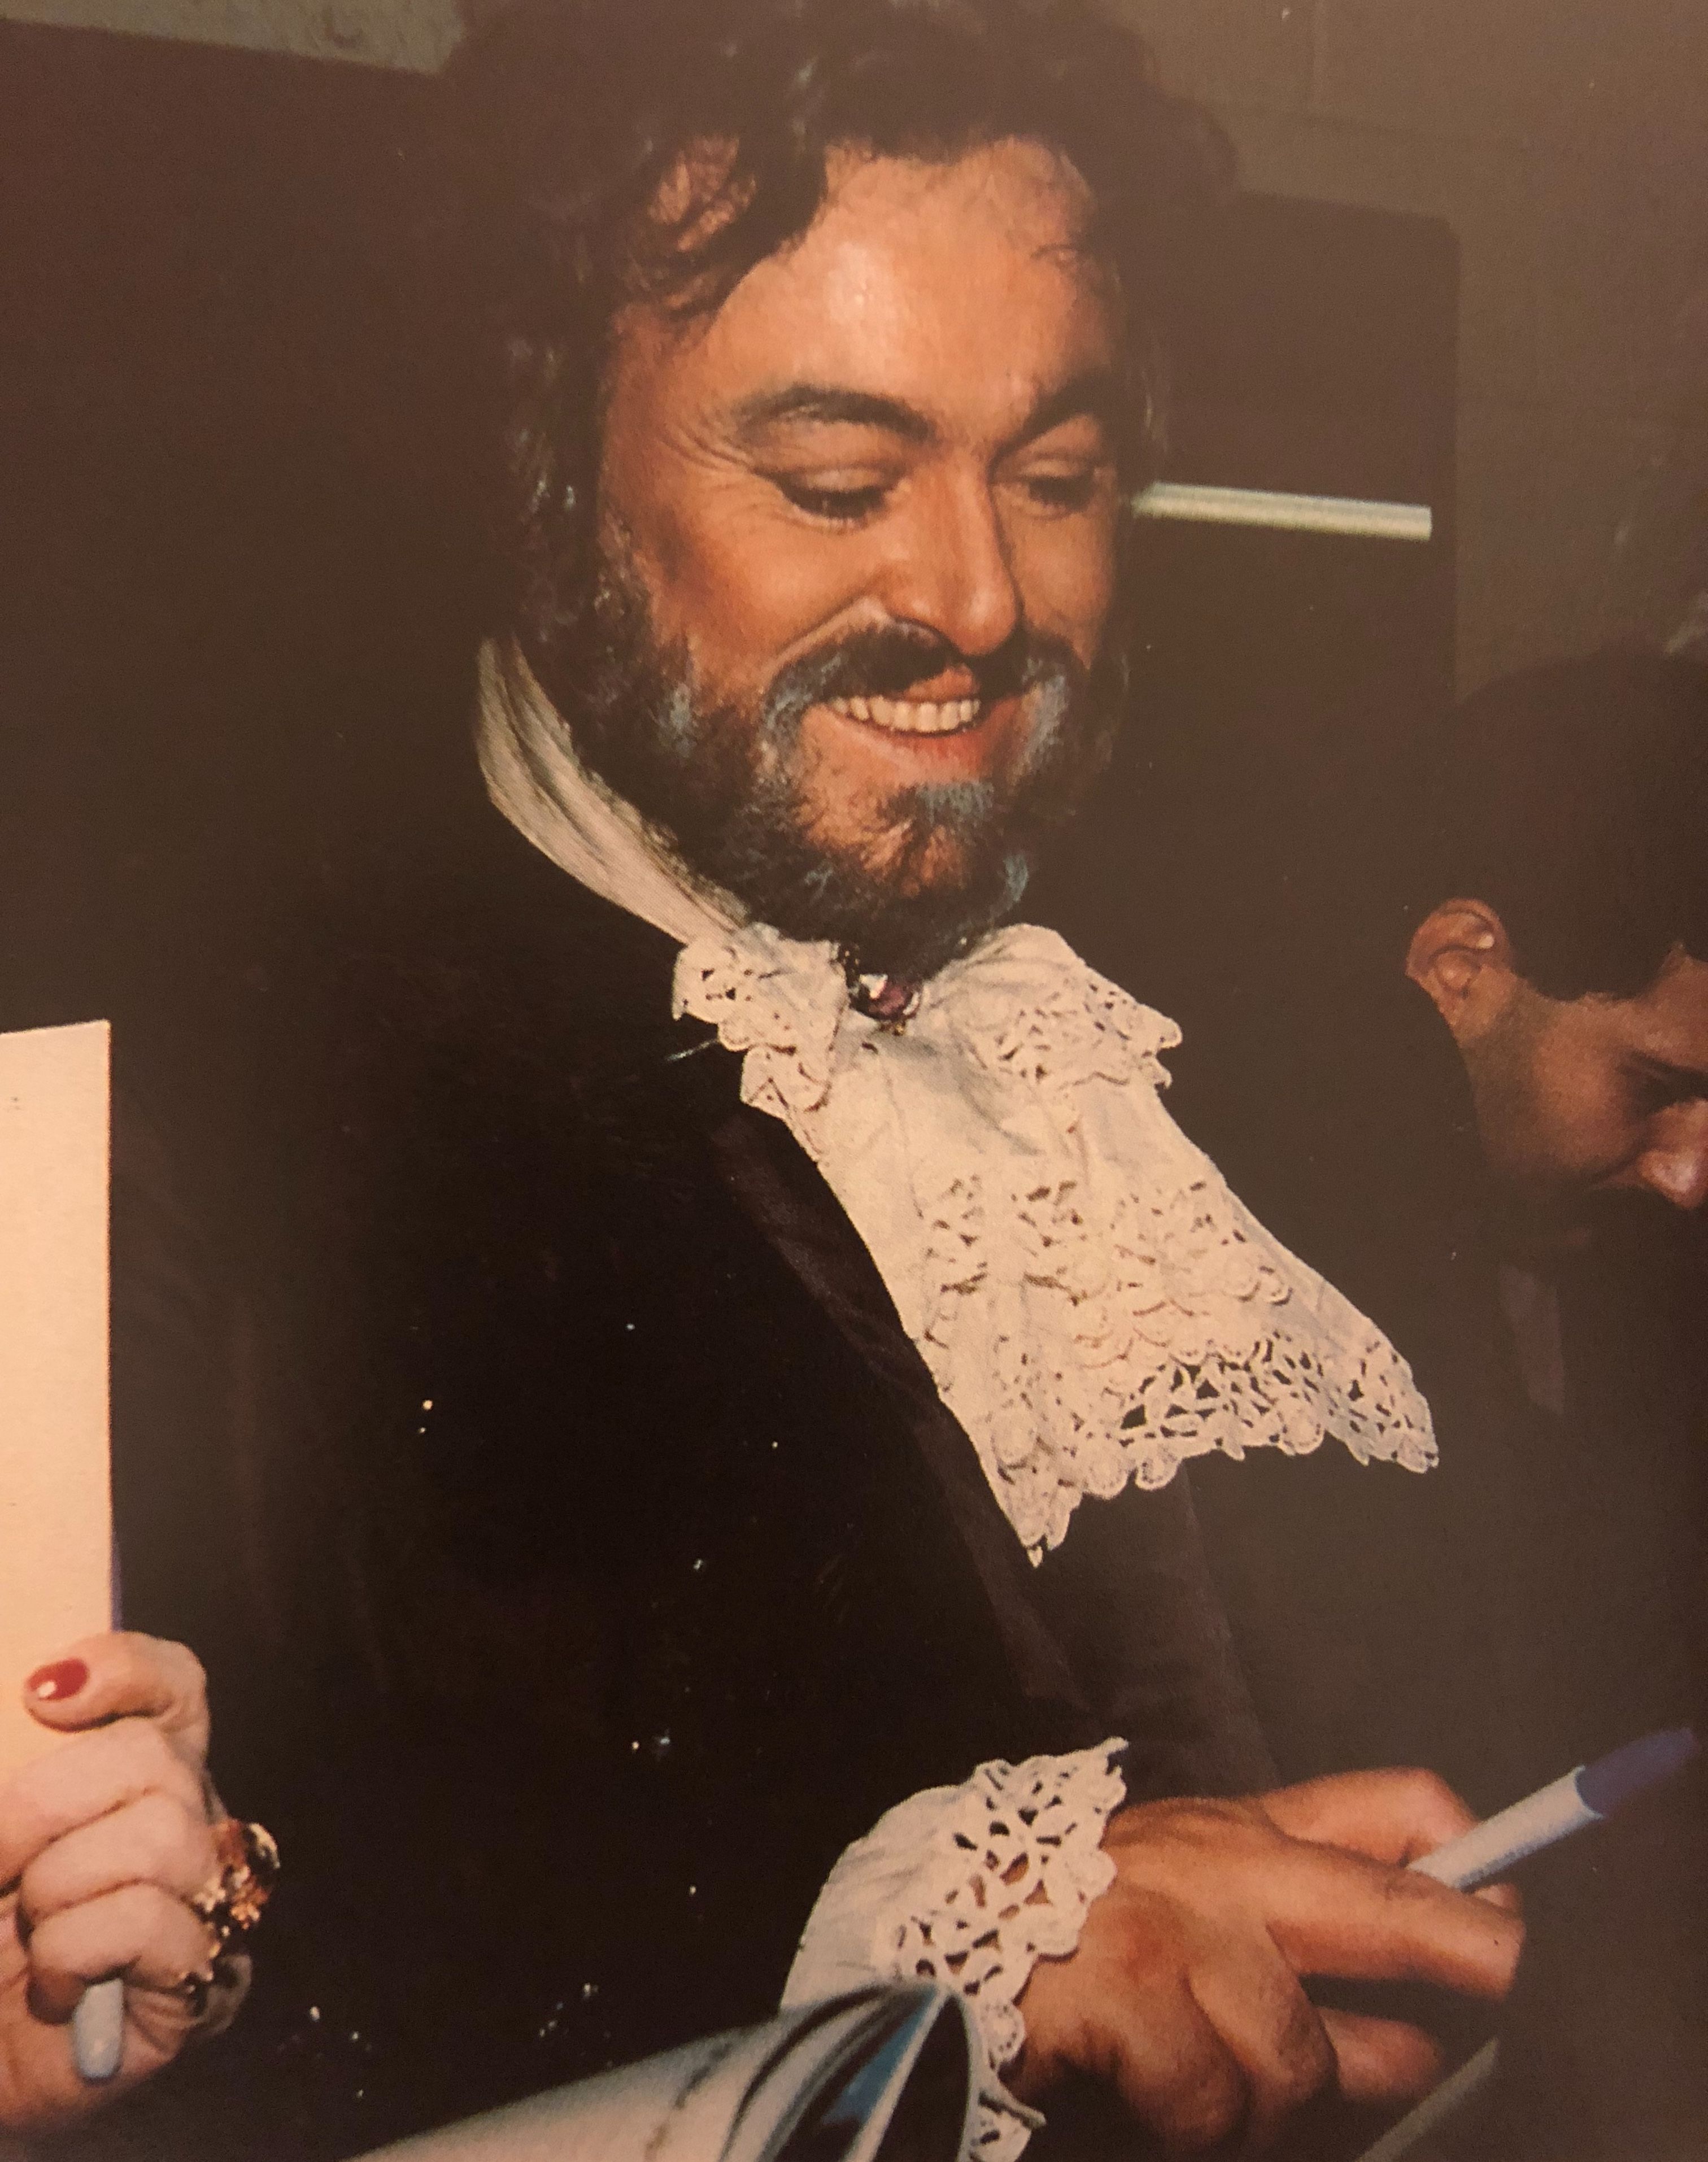 Luciano Pavarotti signs autographs backstage after a performance